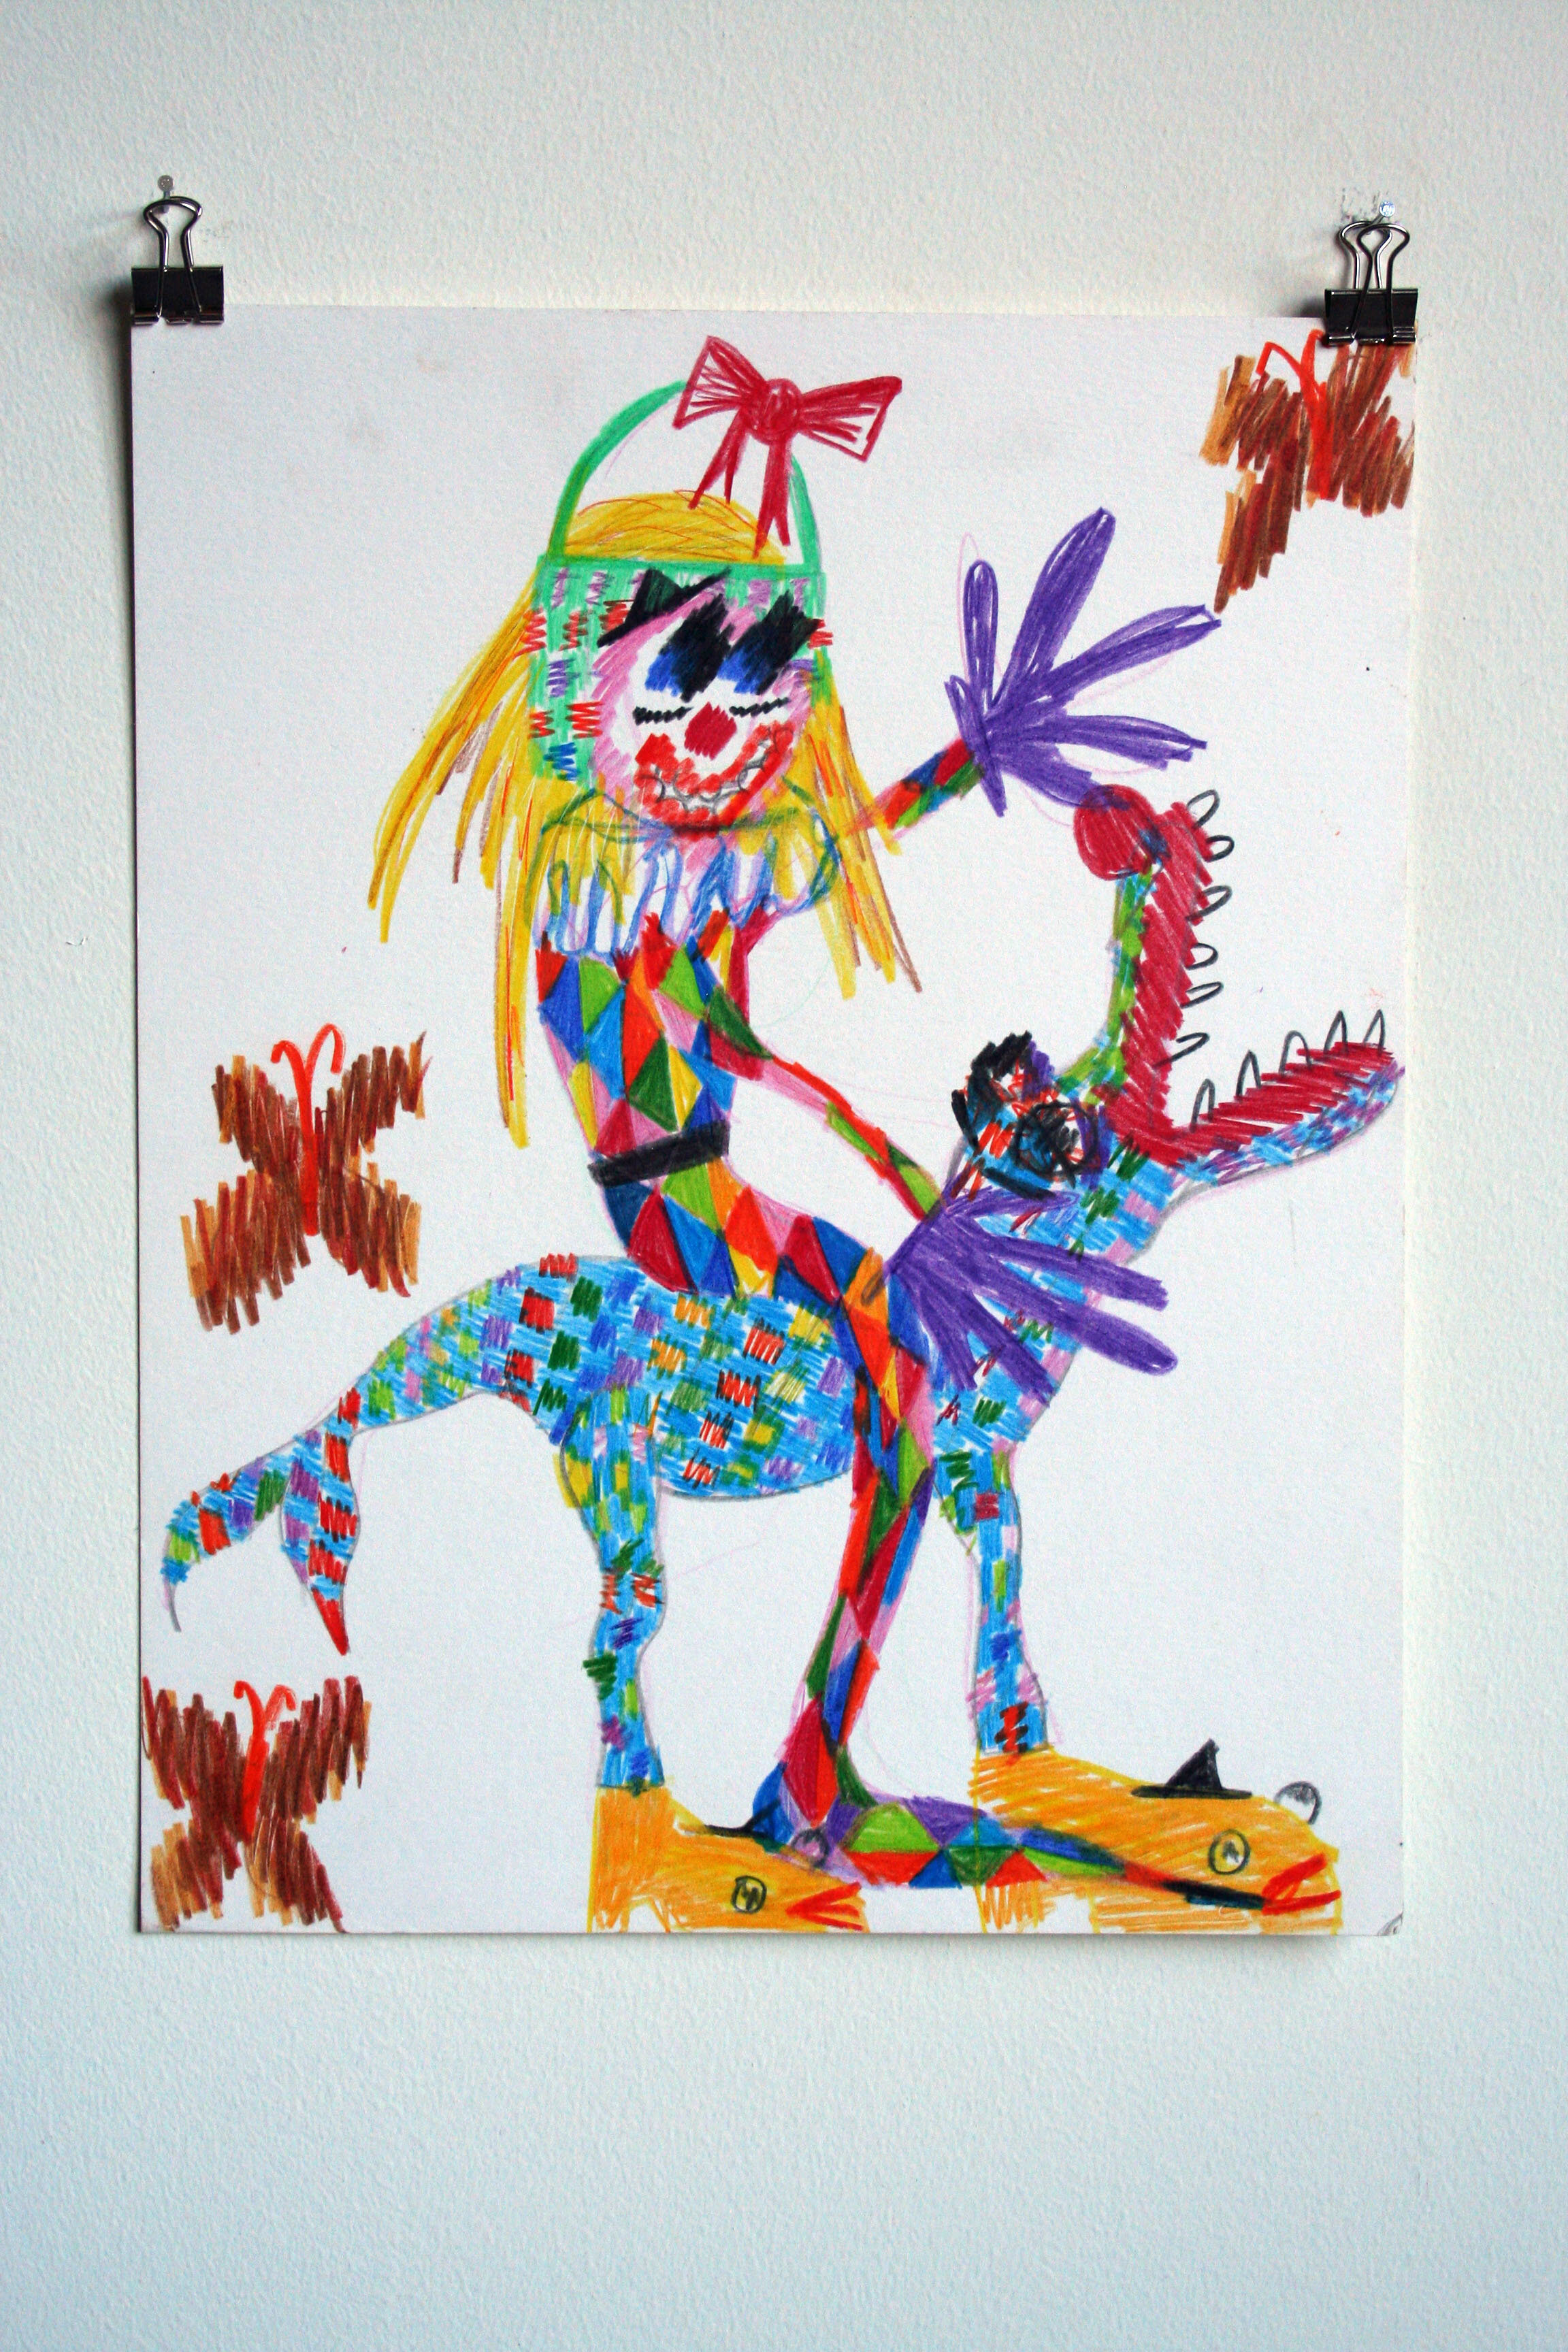   The Blonde Jester Wore a Basket-Mask and a Normal-Mask While Riding a Basket-Dolphin-Horse,  2013  14 x 11 inches (35.56 x 27.94 cm.)  Colored pencil on paper 